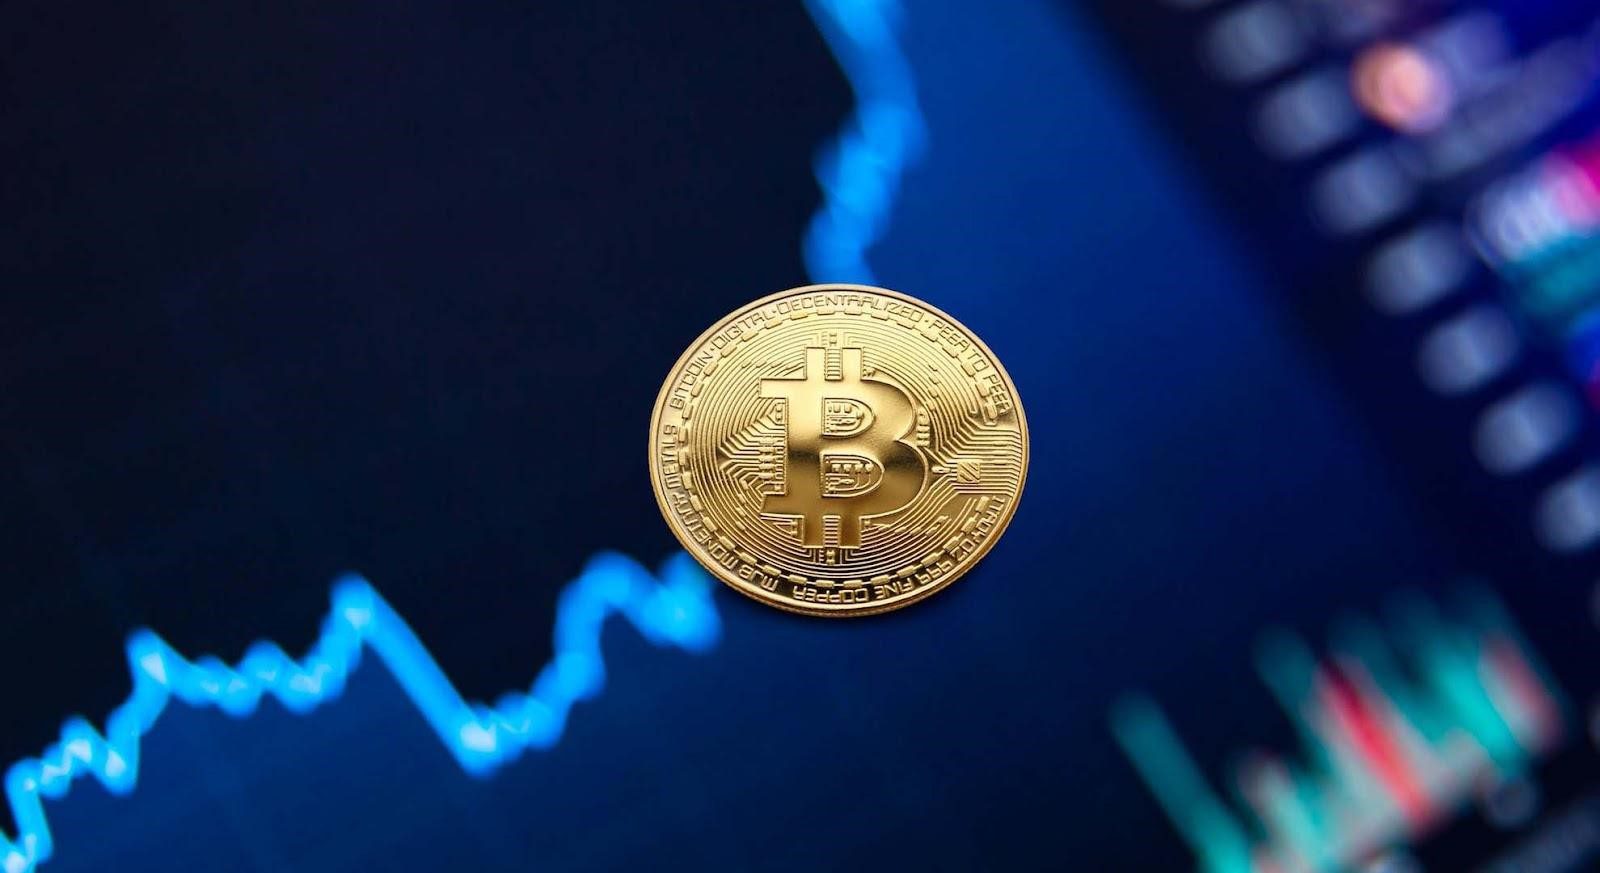 An image of a gold coin with the bitcoin logo on it with a graph in the background